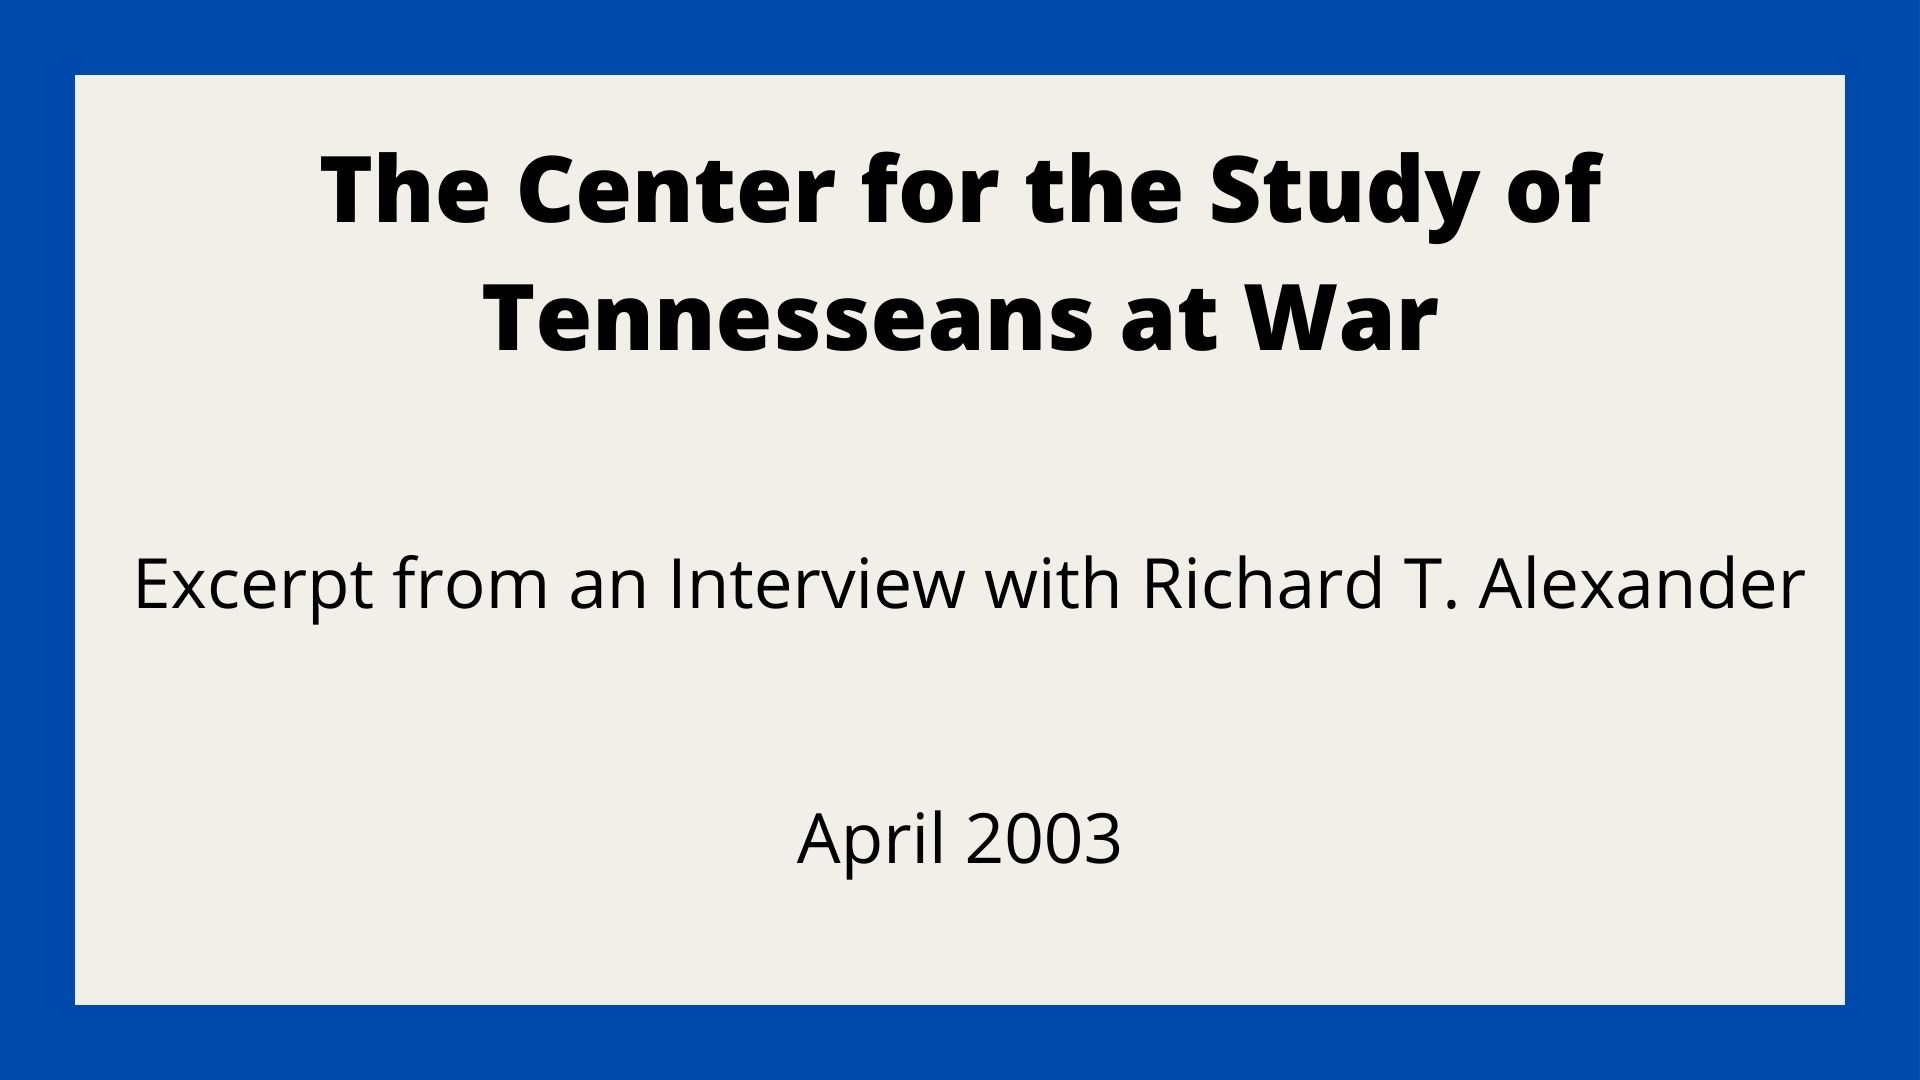 The Center for the Study of Tennesseans at War